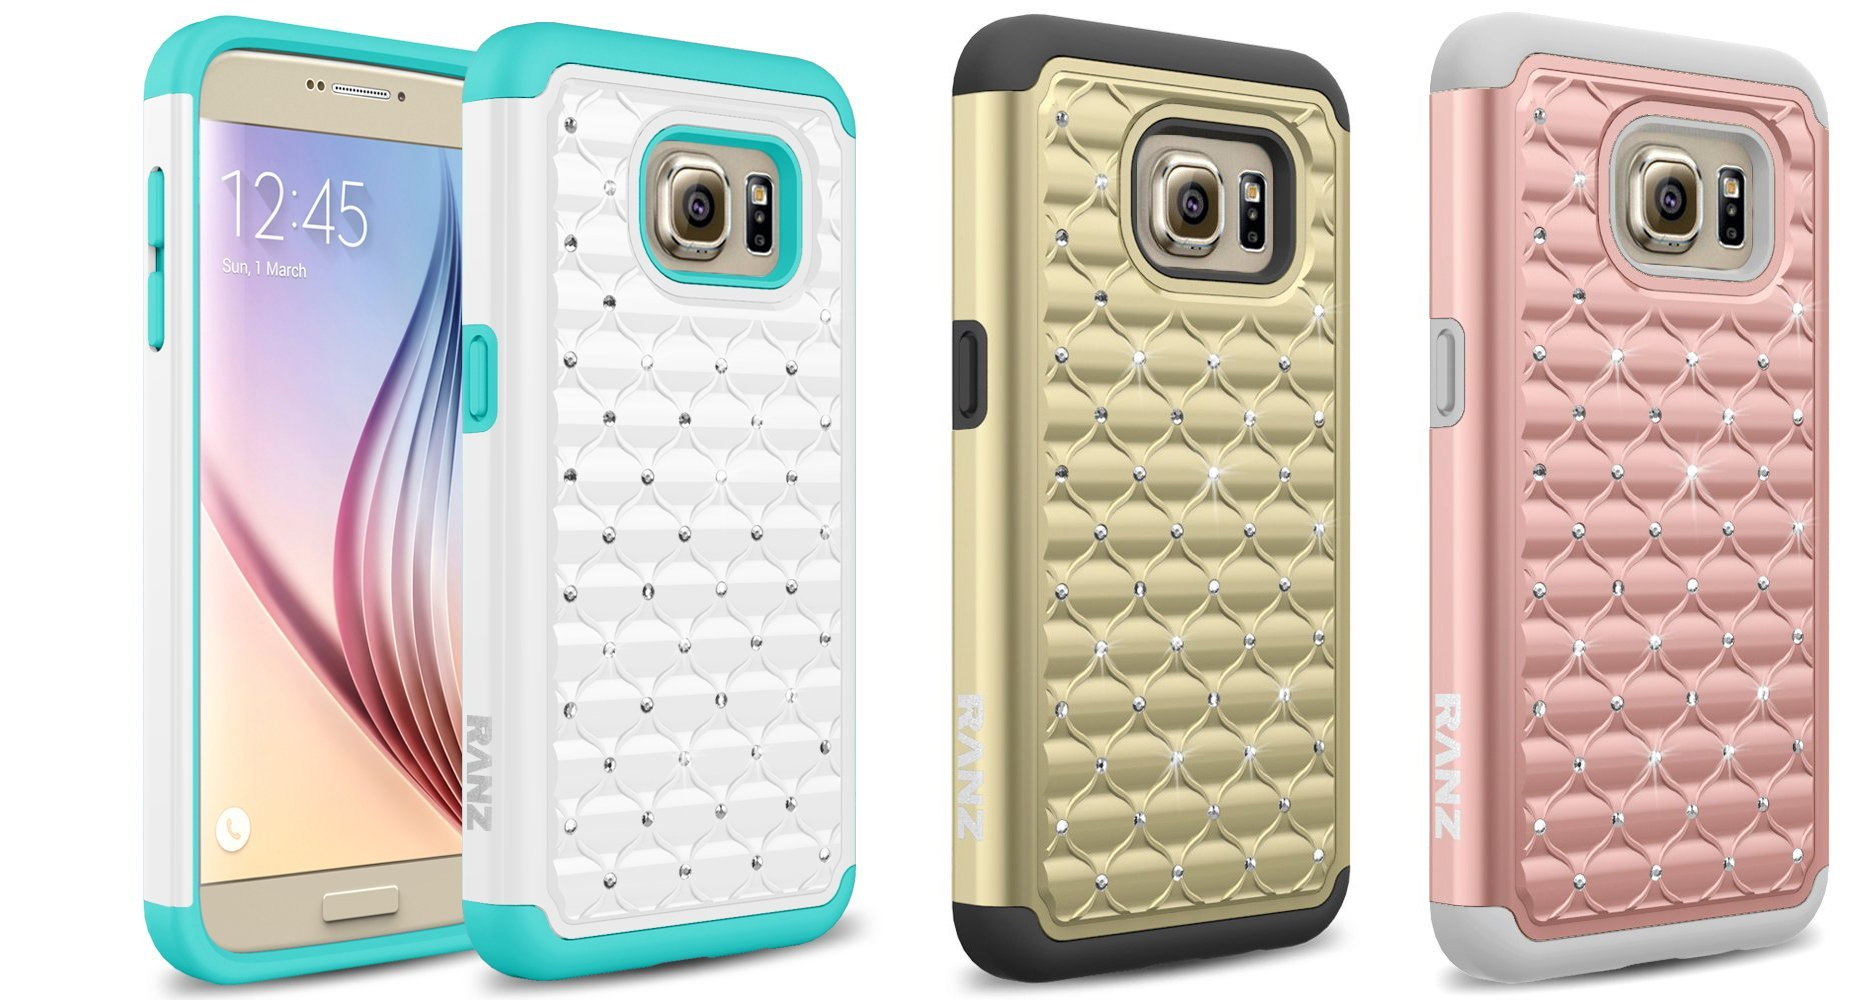 Galaxy S7 Case Diamond Studded Bling Silicone Rubber Skin Hard Case